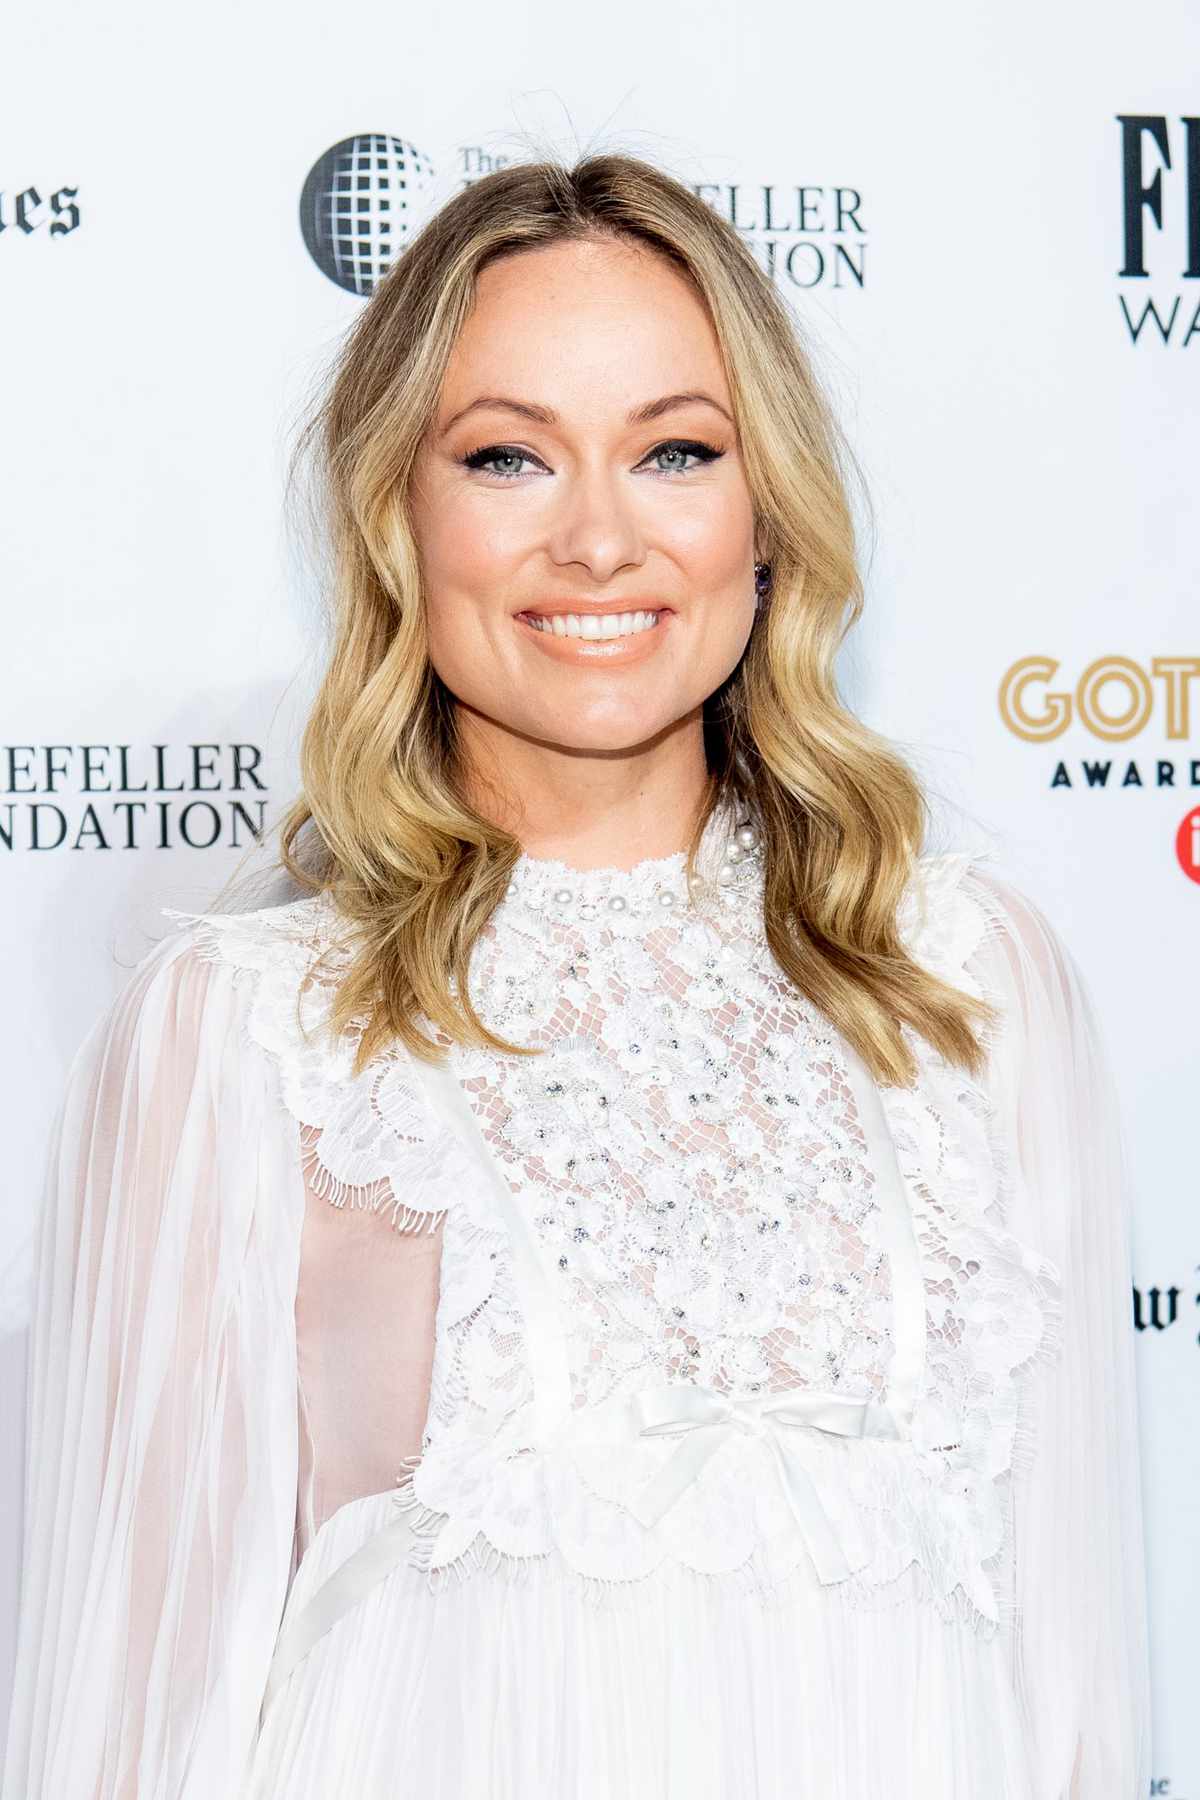 Olivia Wilde Called Out Another Double Standard in Her New Movie, Richard Jewell